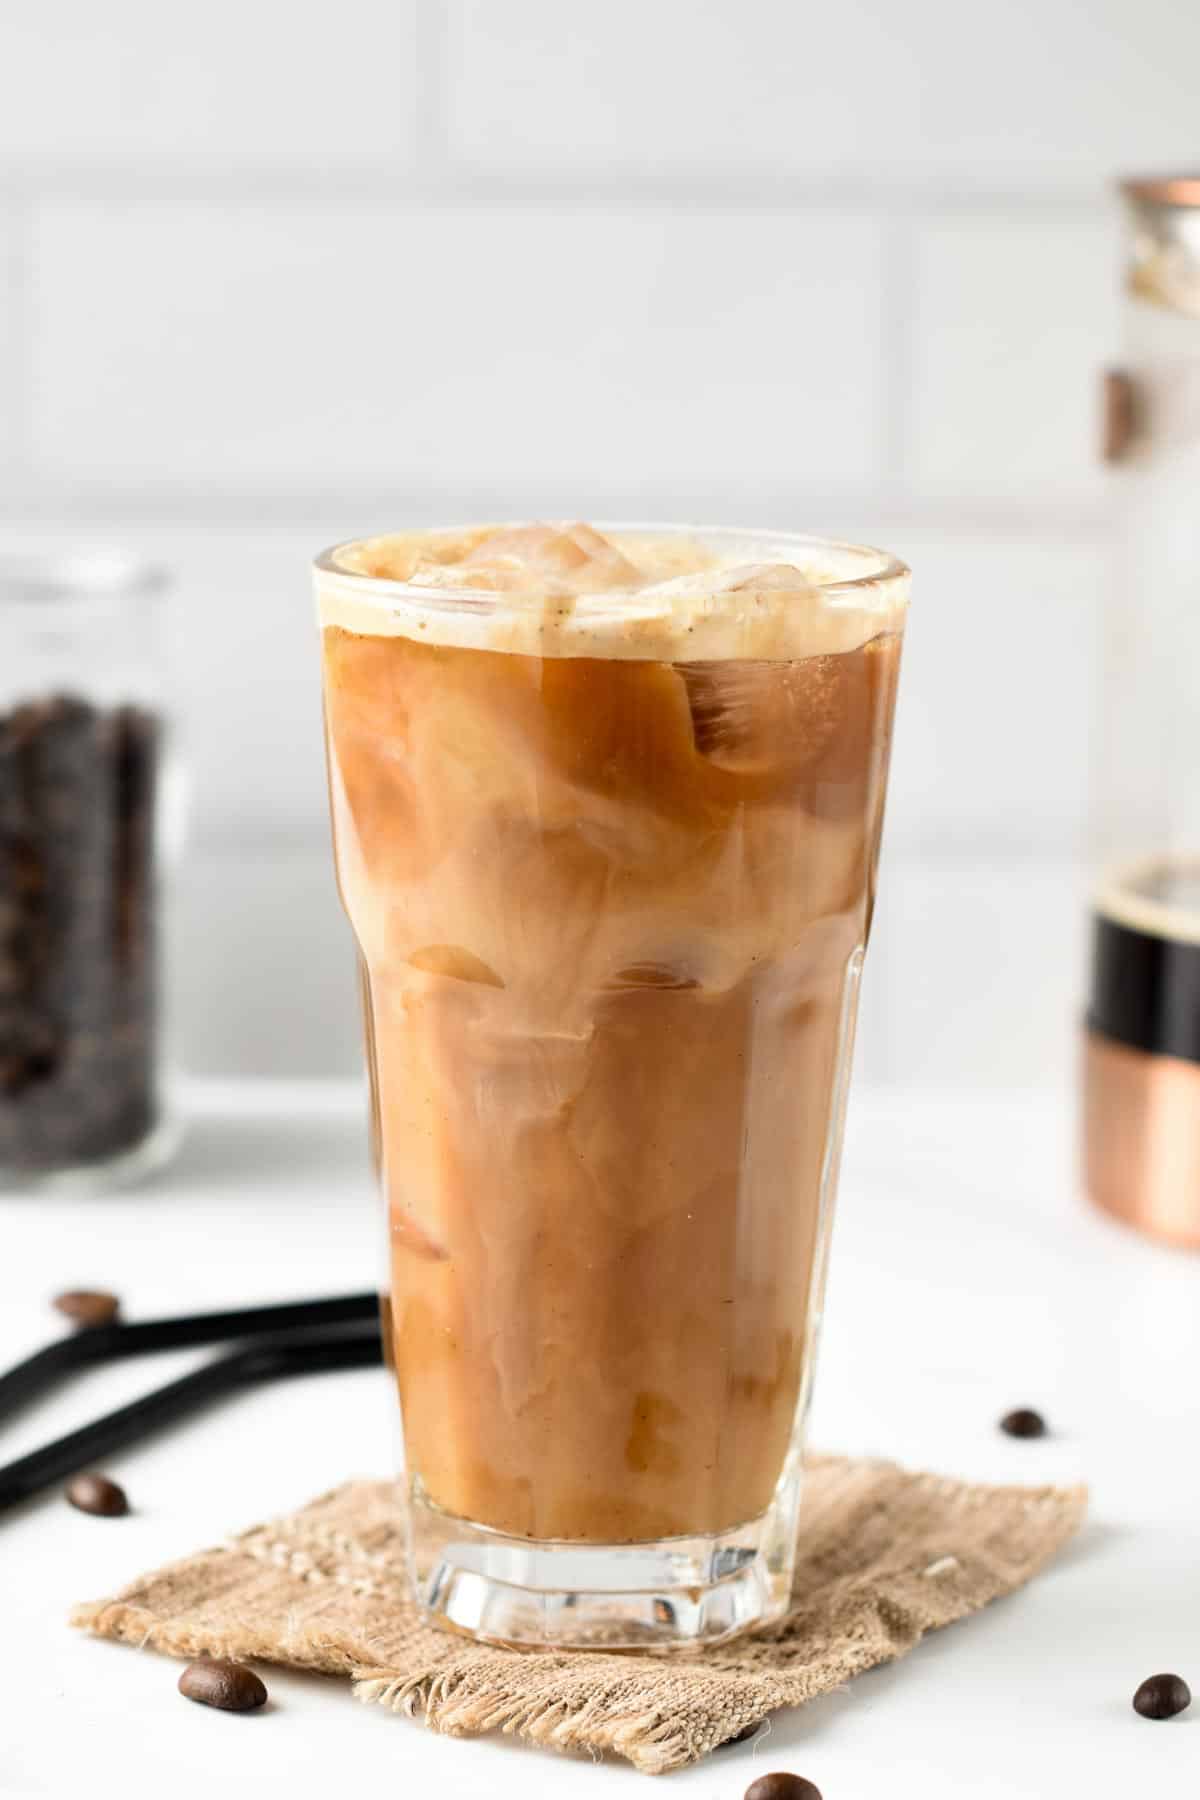 How To Make Iced Coffee At Home